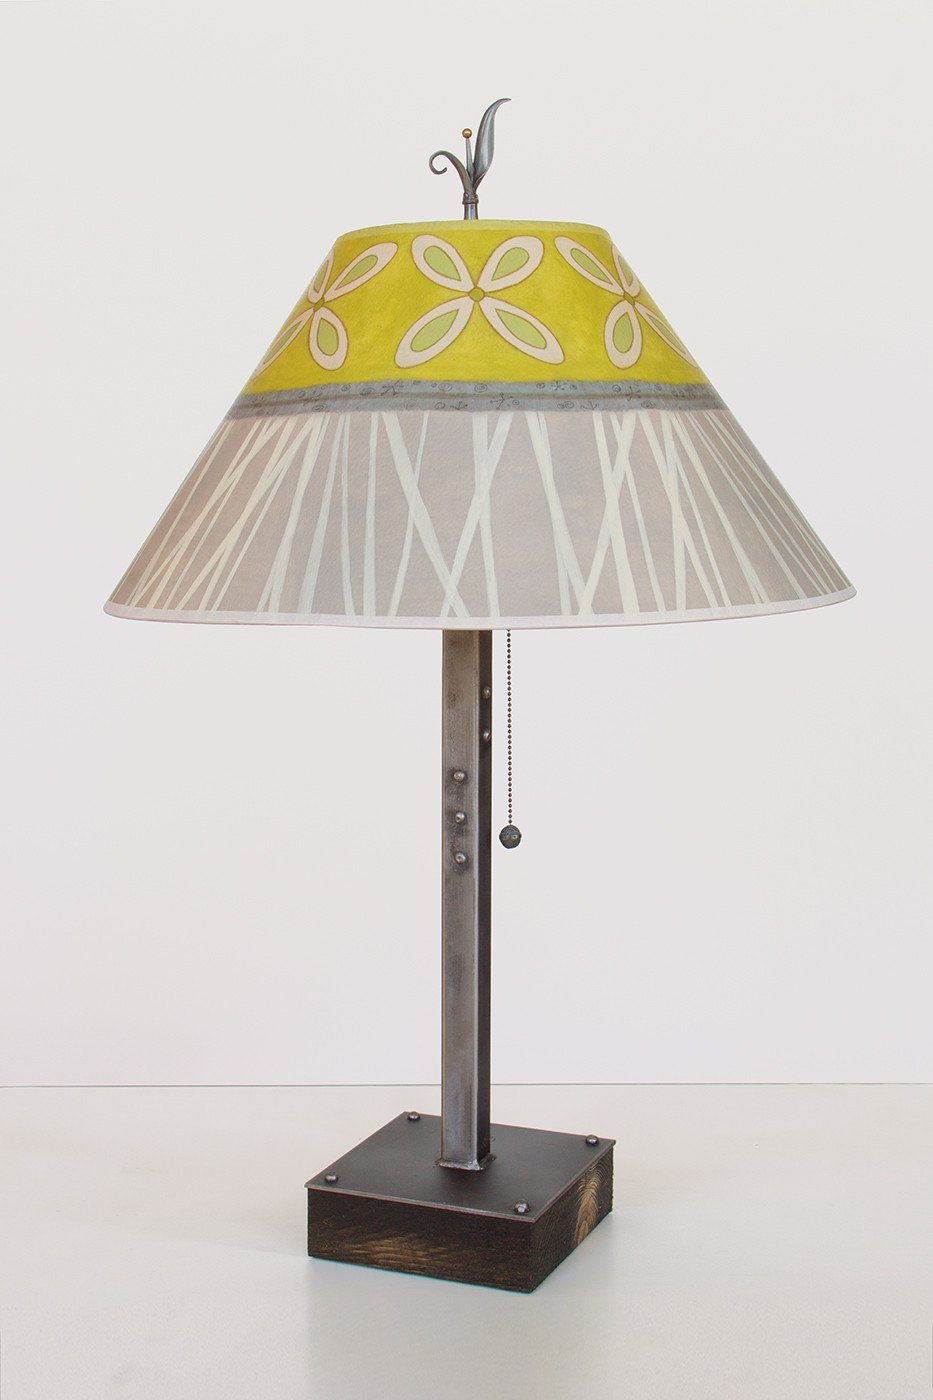 Janna Ugone & Co Table Lamps Steel Table Lamp on Wood with Large Conical Shade in Kiwi